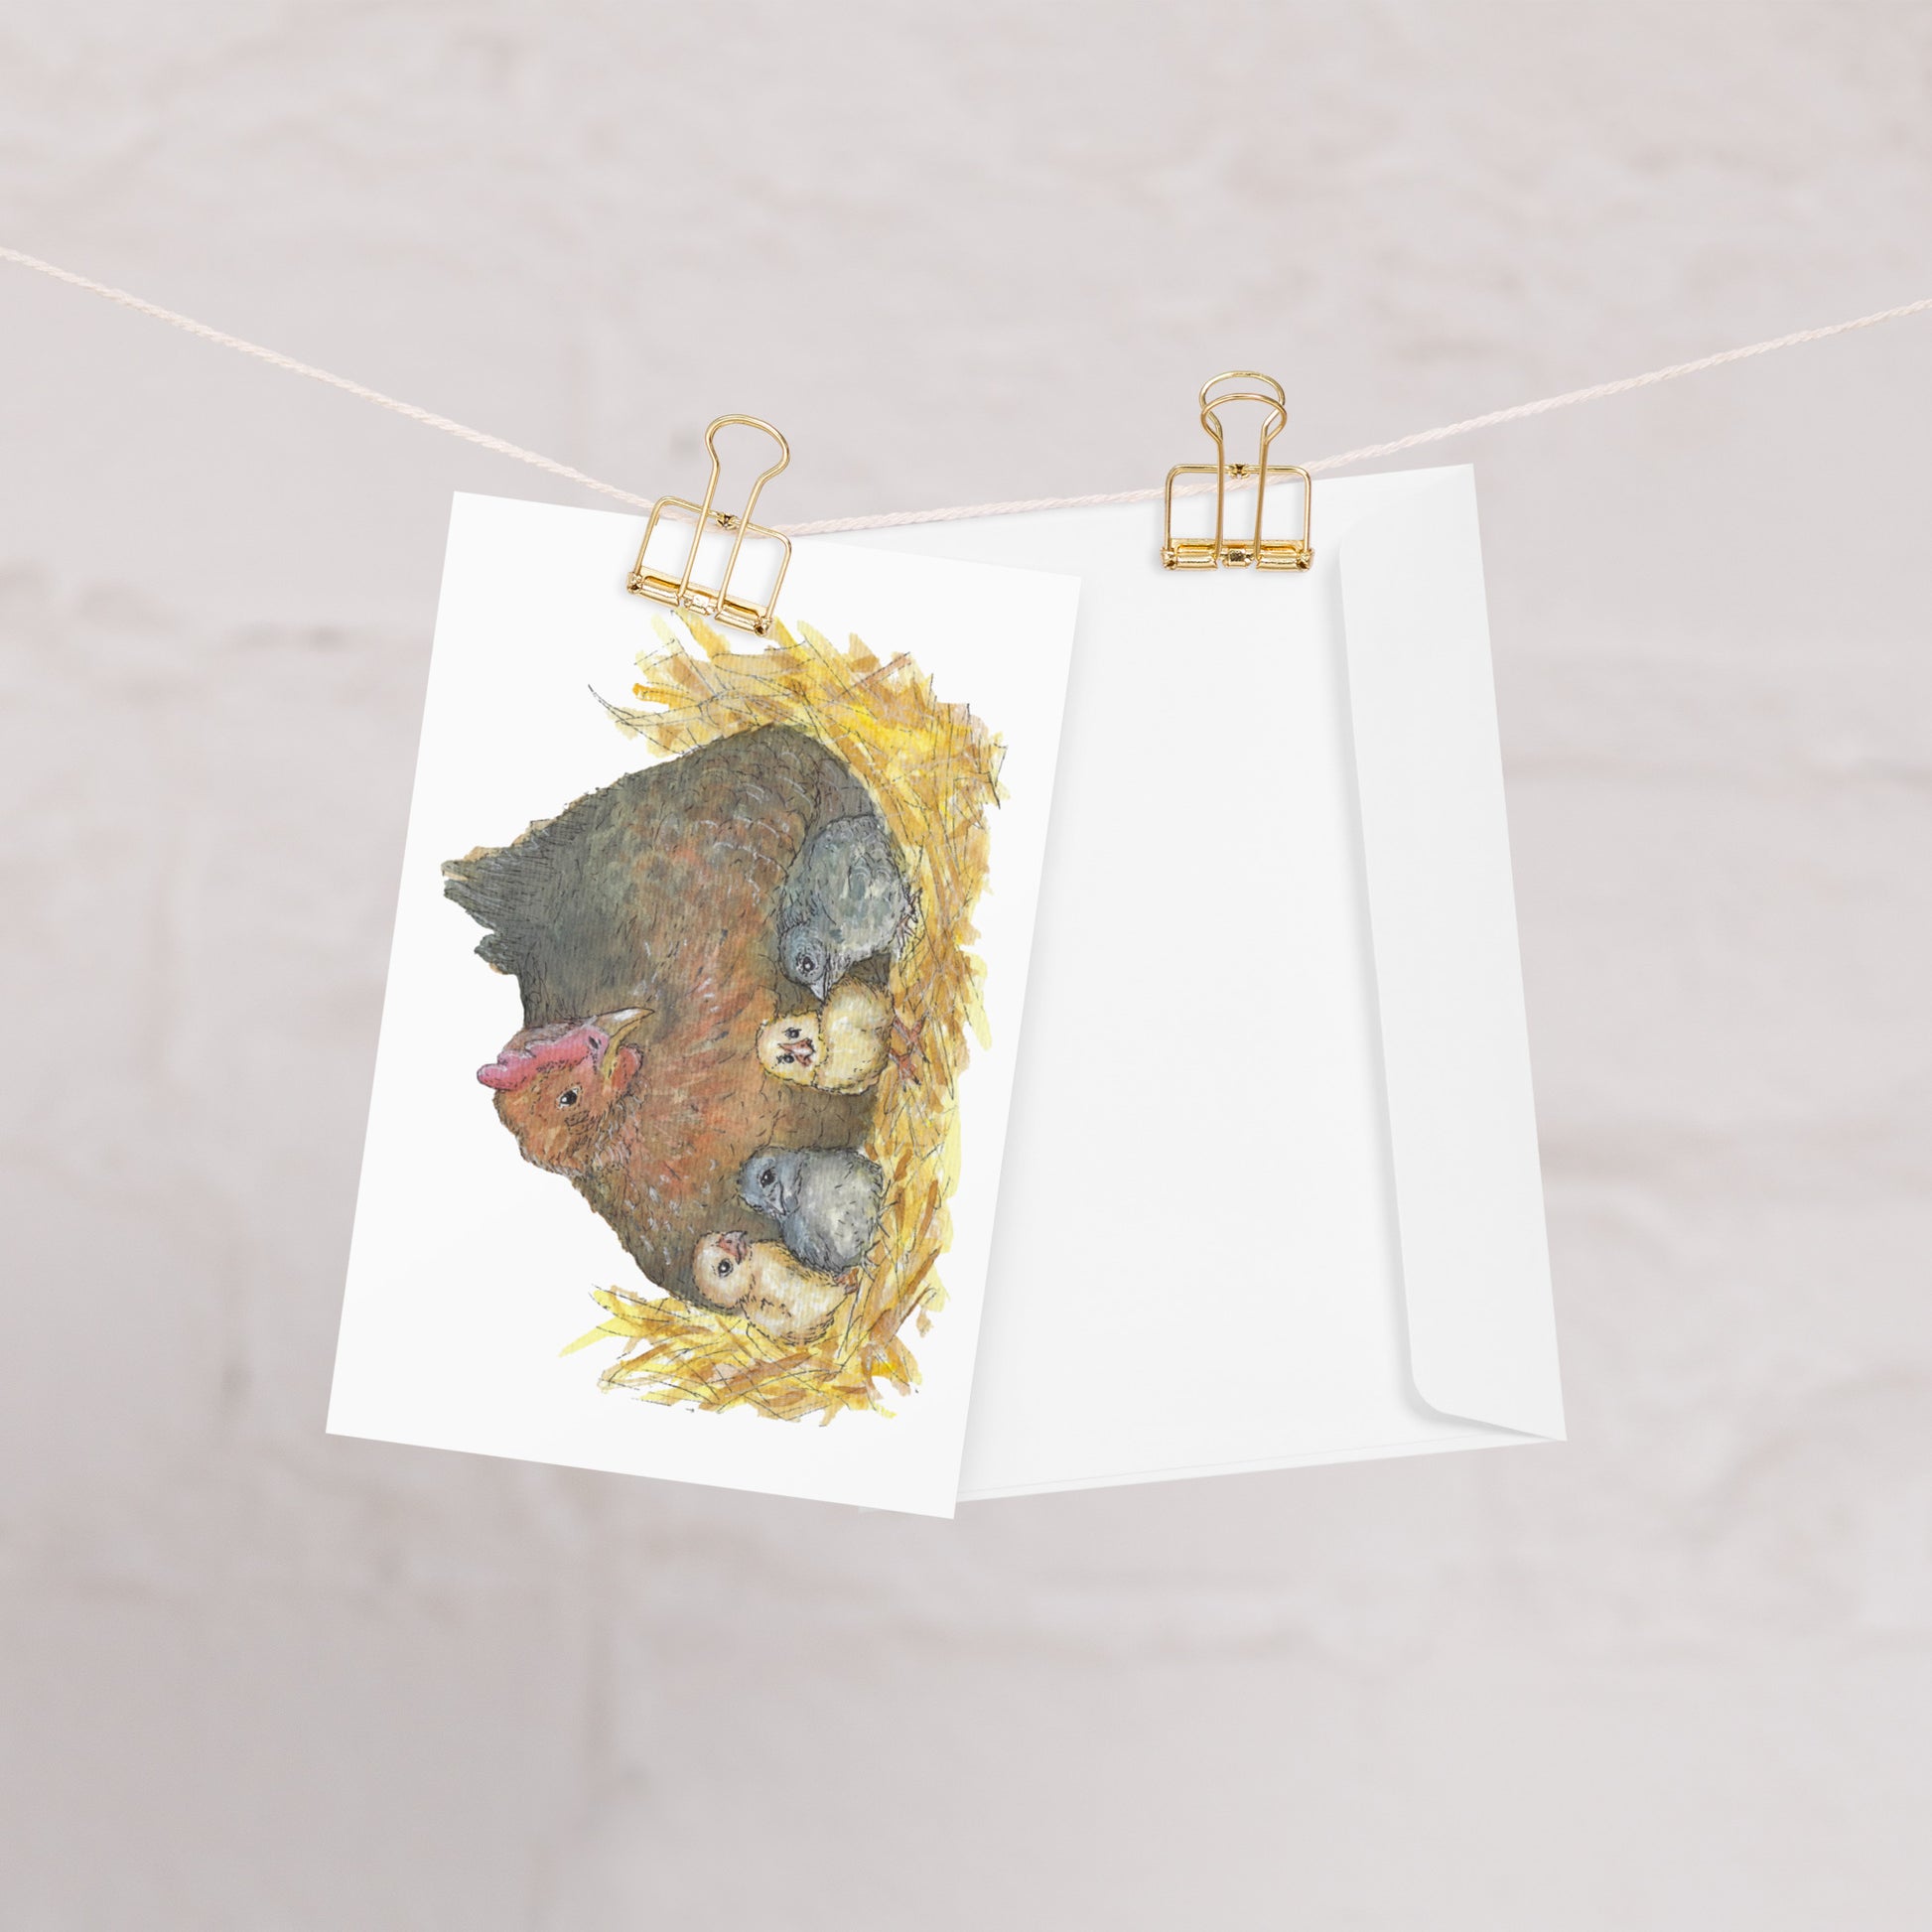 4 by 6 inch greeting card and envelope. Front features watercolor print of a mother hen and four chicks in a nest. Inside is blank. Image shows card and enveloped clipped to a string.